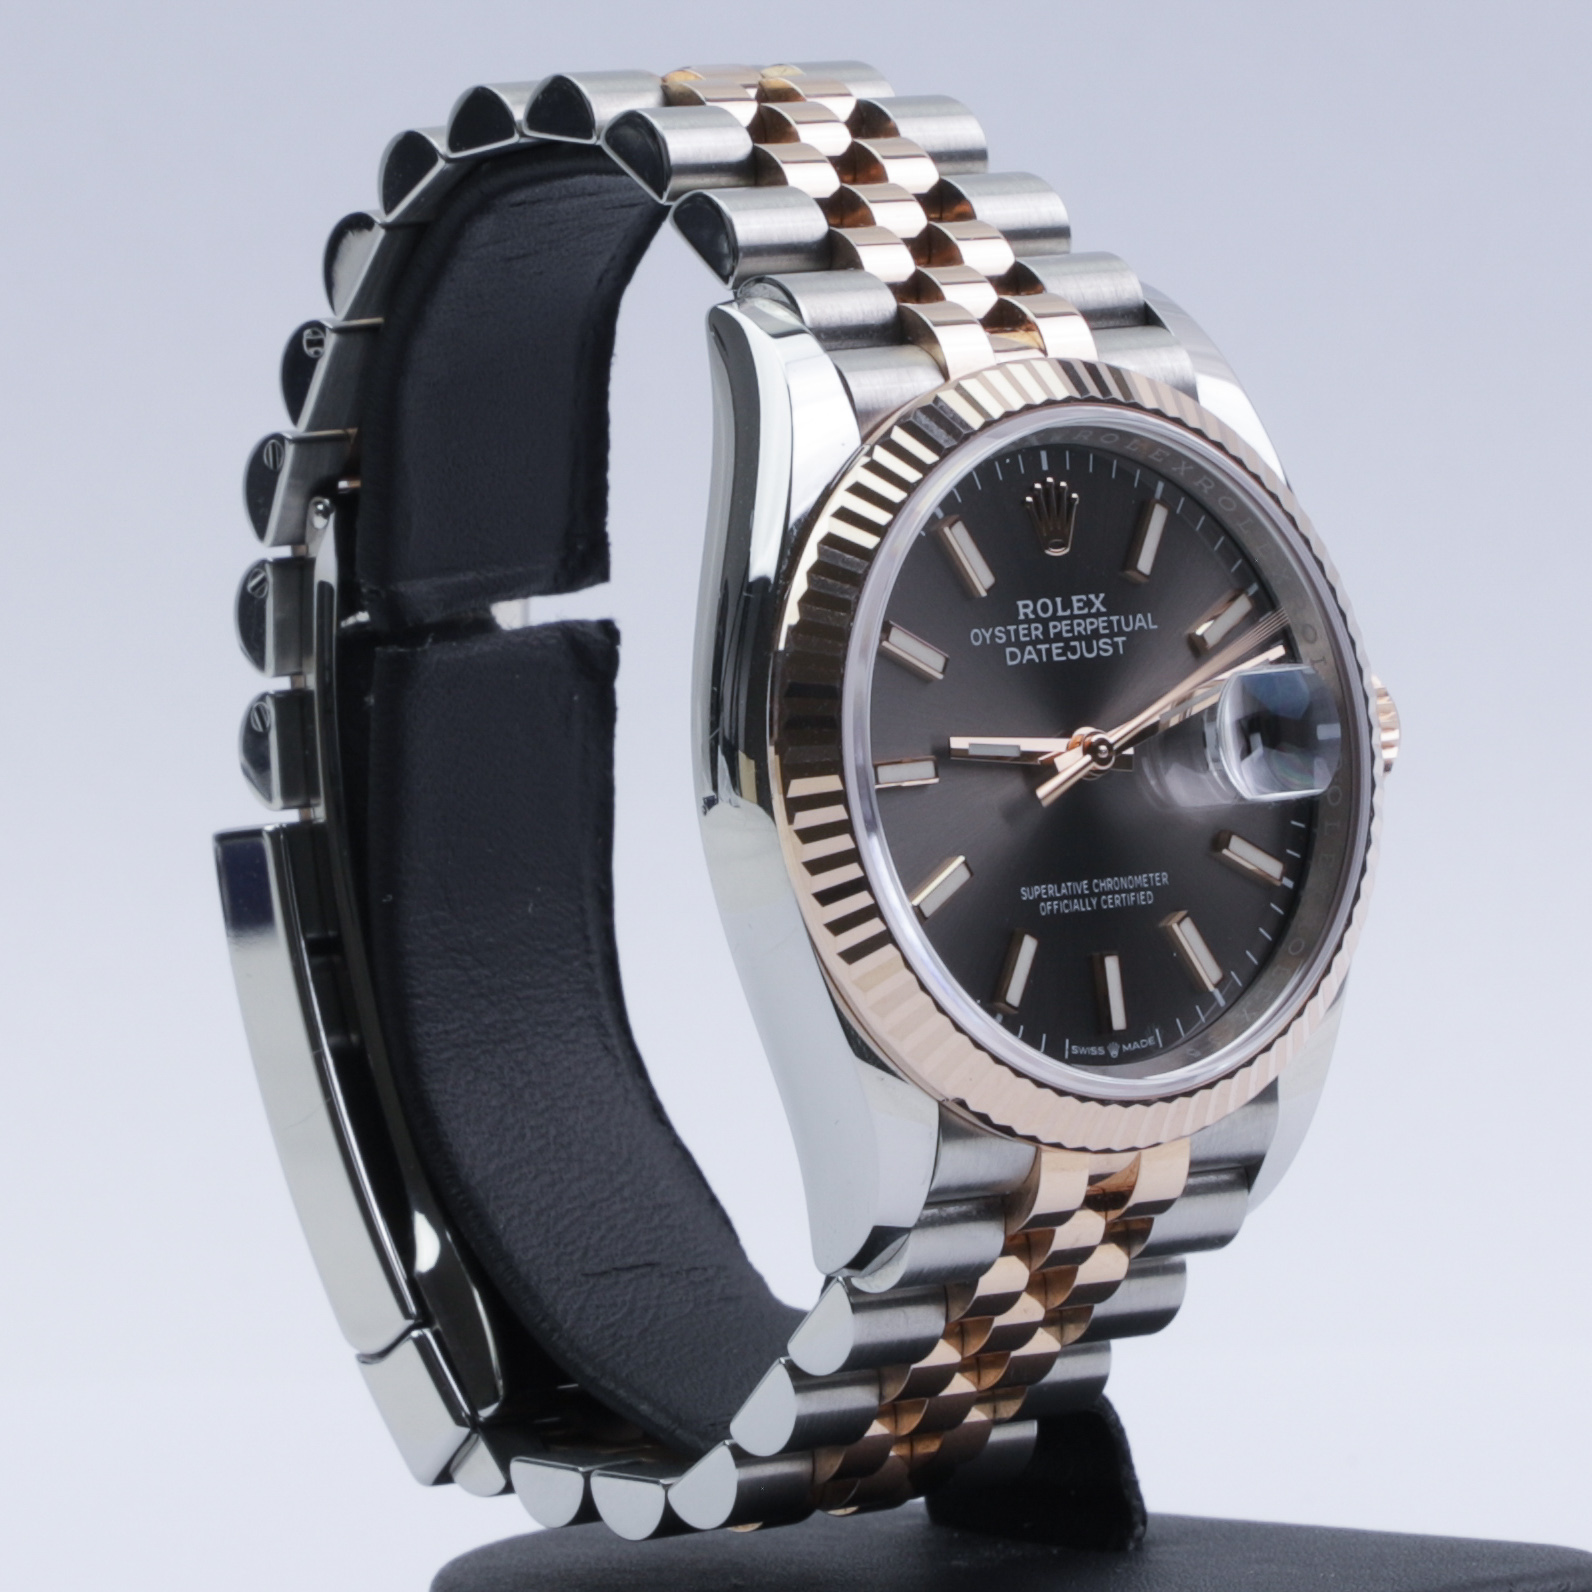 datejust 36 dial